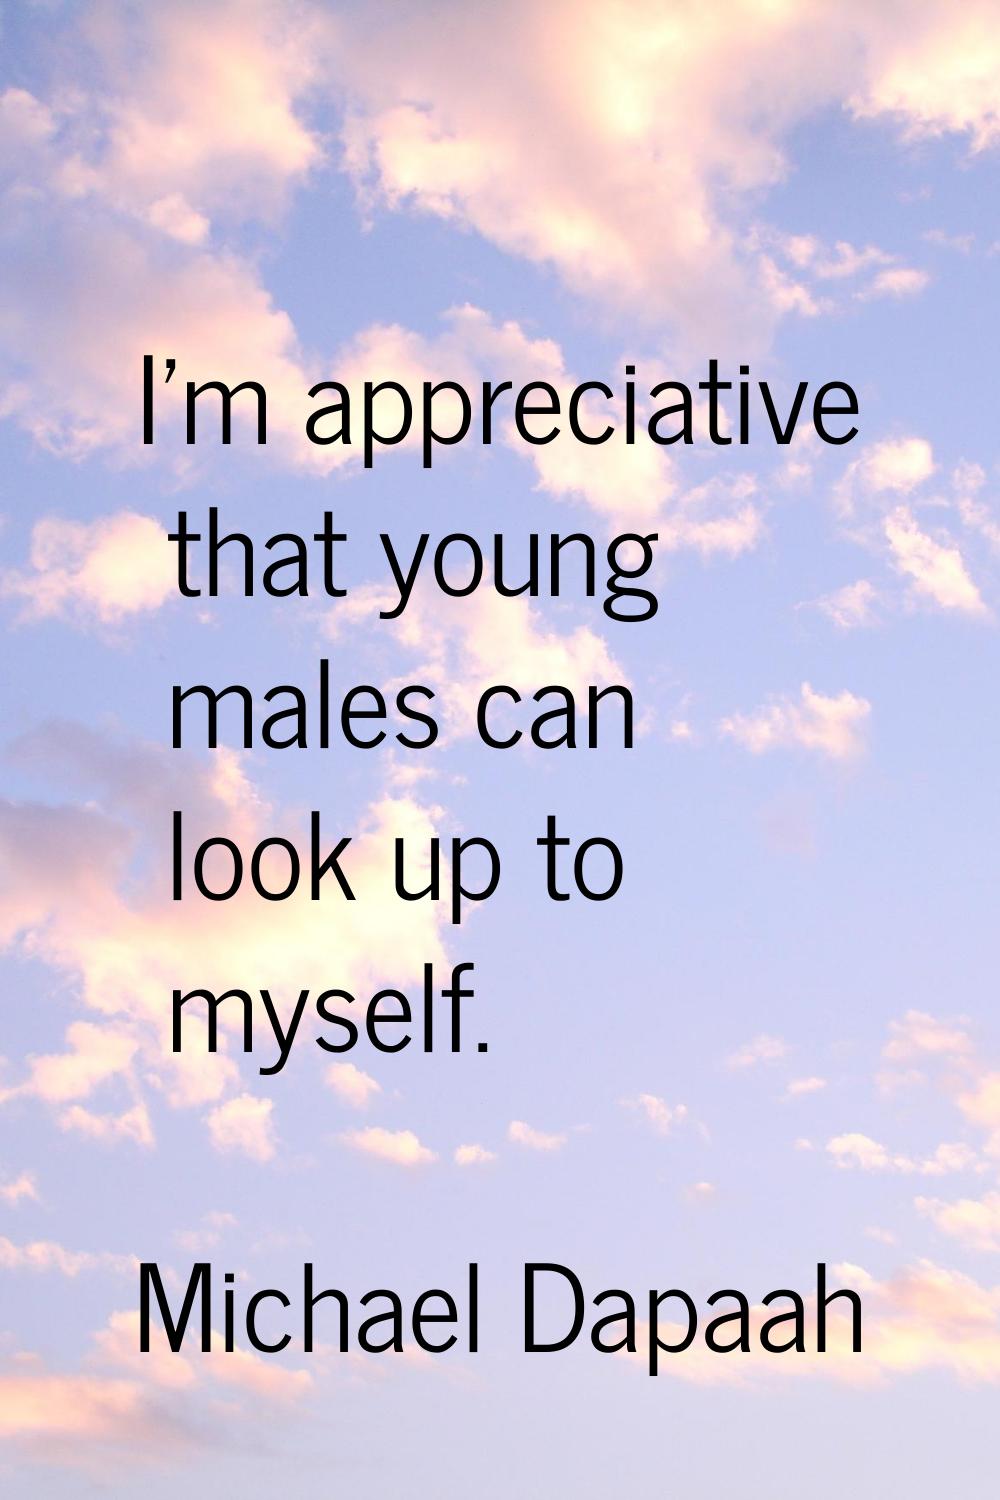 I'm appreciative that young males can look up to myself.